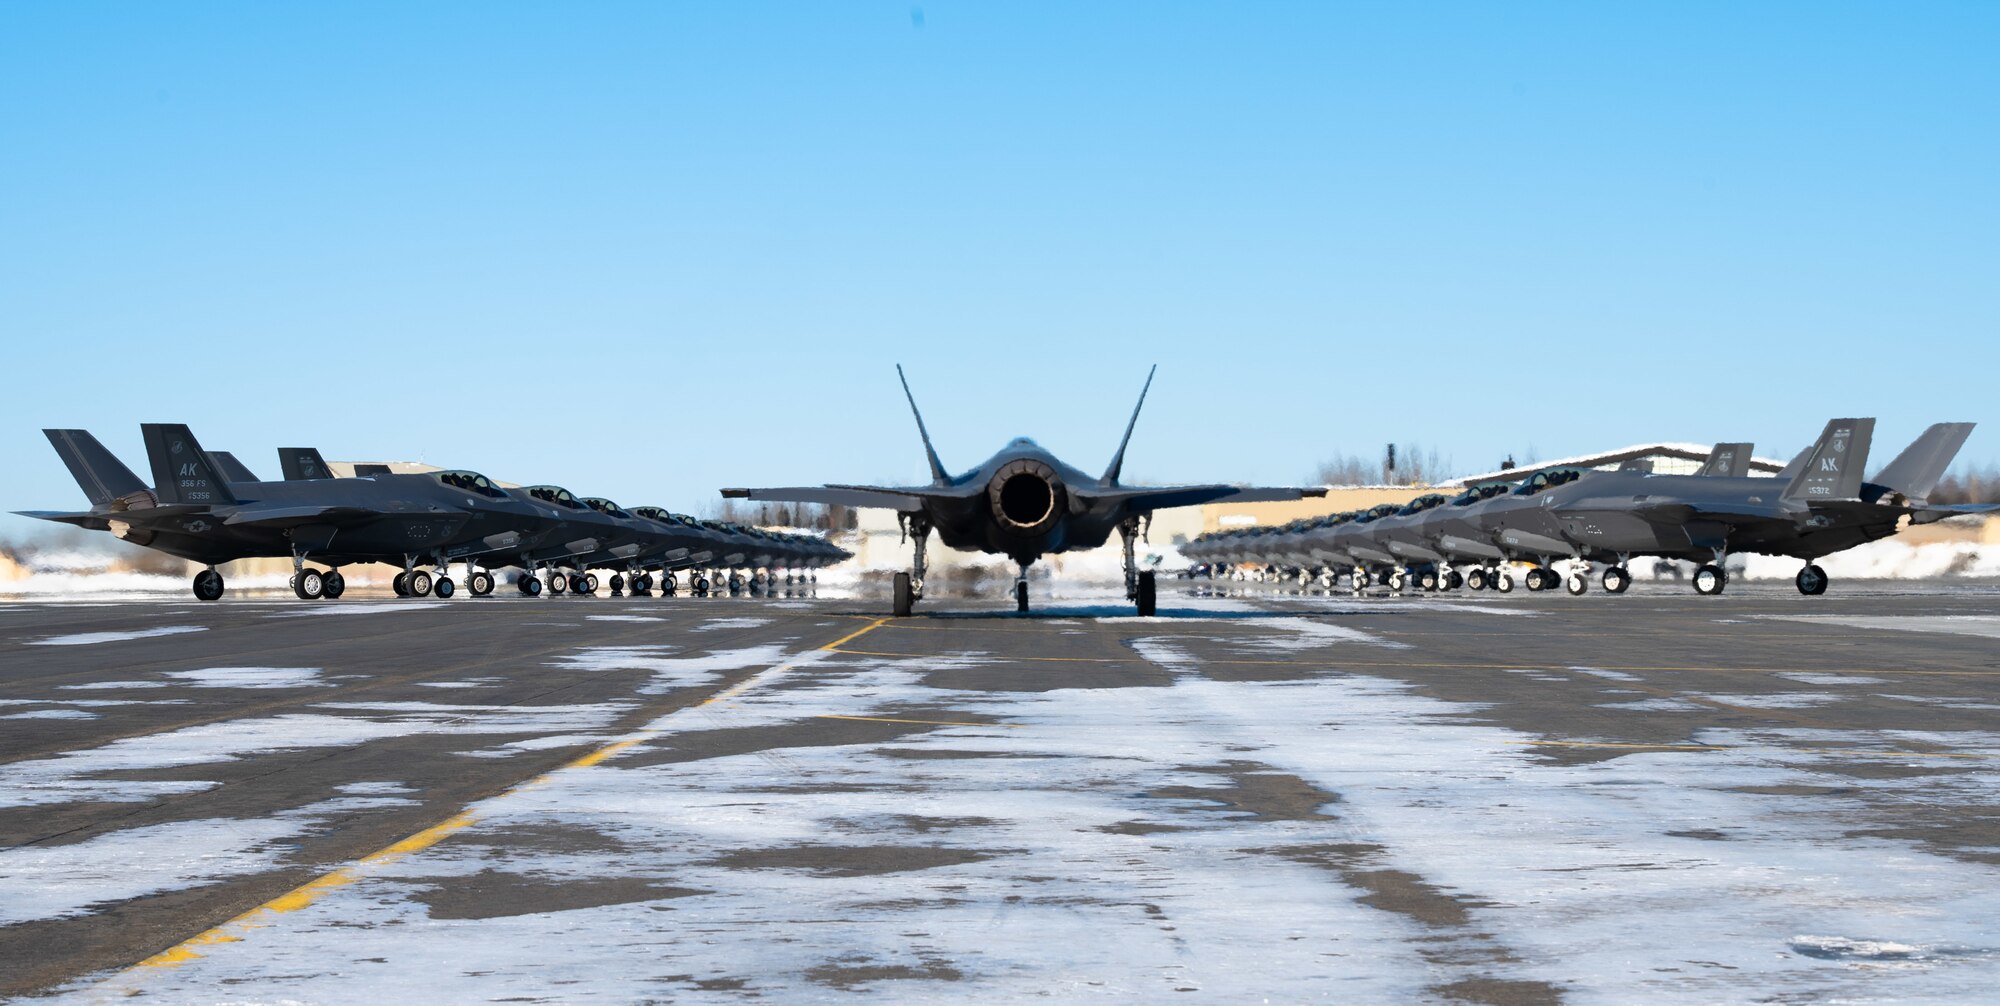 Twenty five F-35A Lightning IIs assigned to the 354th Fighter Wing assemble on the flightline prior to taking off during Arctic Gold (AG) 21-2 at Eielson Air Force Base, Alaska, April 7, 2021. AG 21-2 is a Phase I and Phase II readiness exercise designed to test the wing’s ability to rapidly generate and deploy F-35A Lightning II aircraft, cargo and supporting personnel. (U.S. Air Force photo by Airman 1st Class Jose Miguel T. Tamondong)